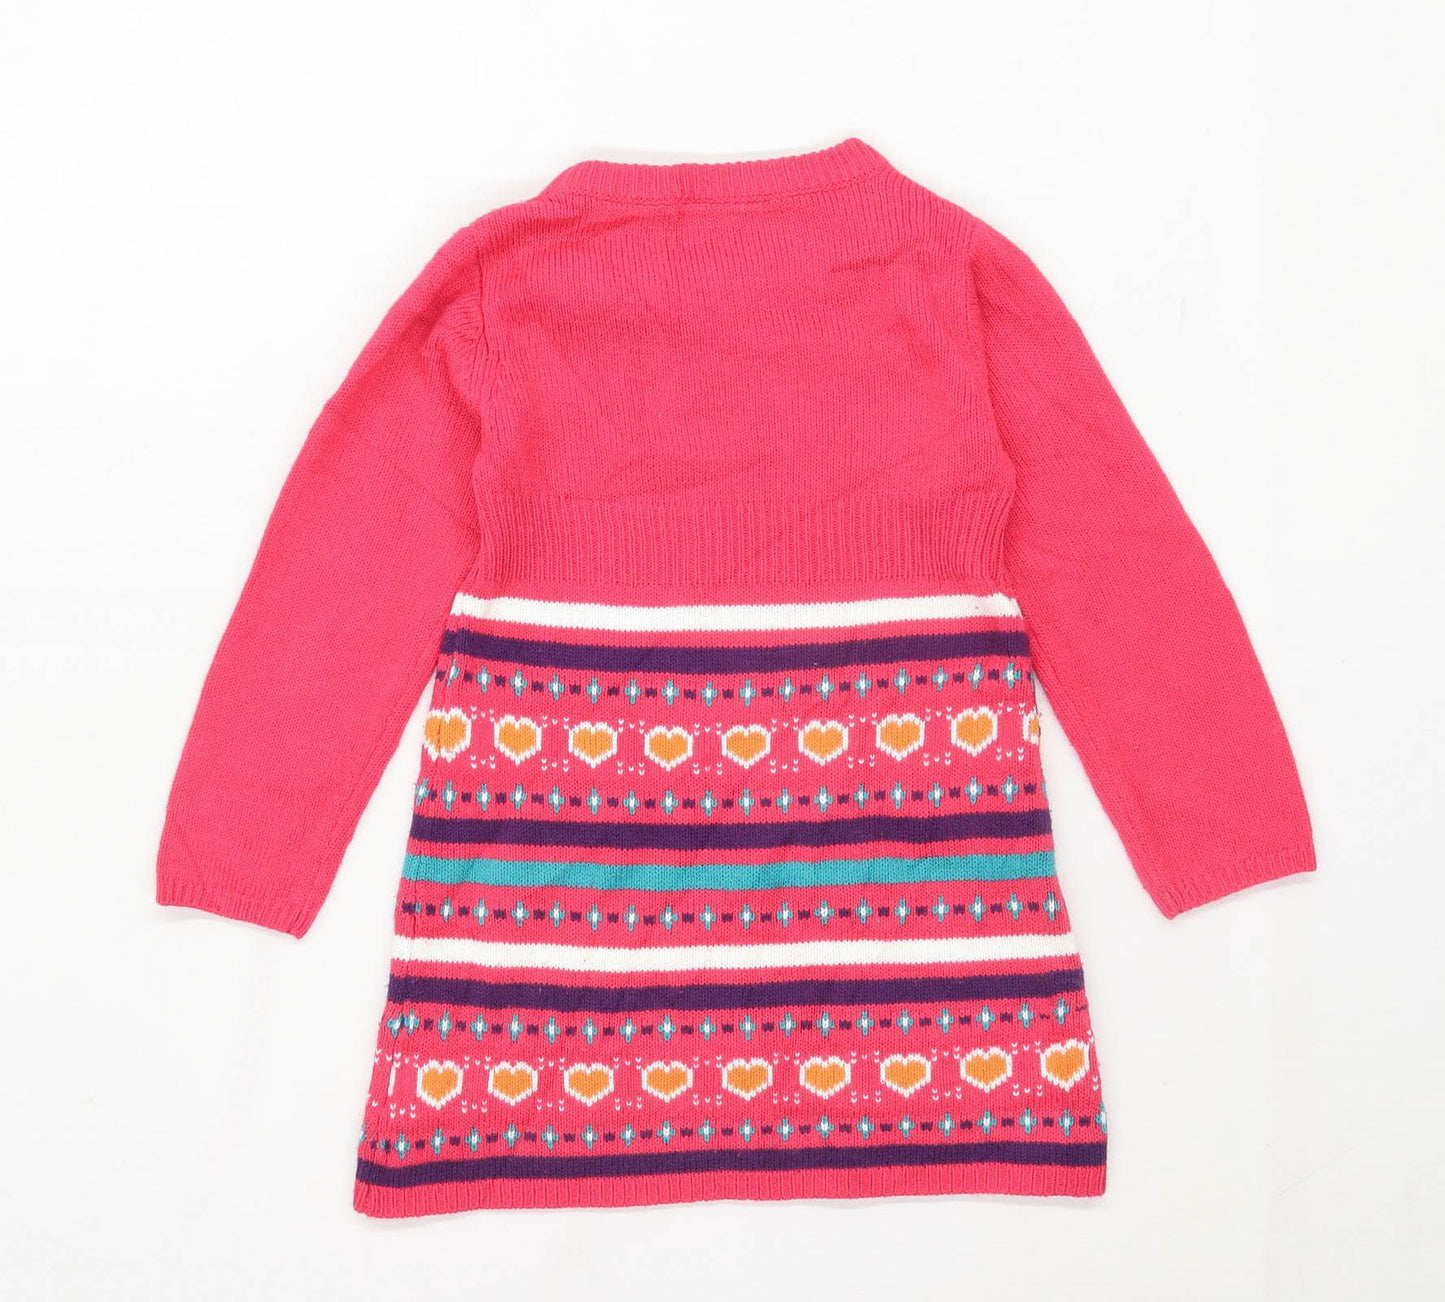 Sweet Millie Girls Geometric Pink Knitted Dress Age 5 Years